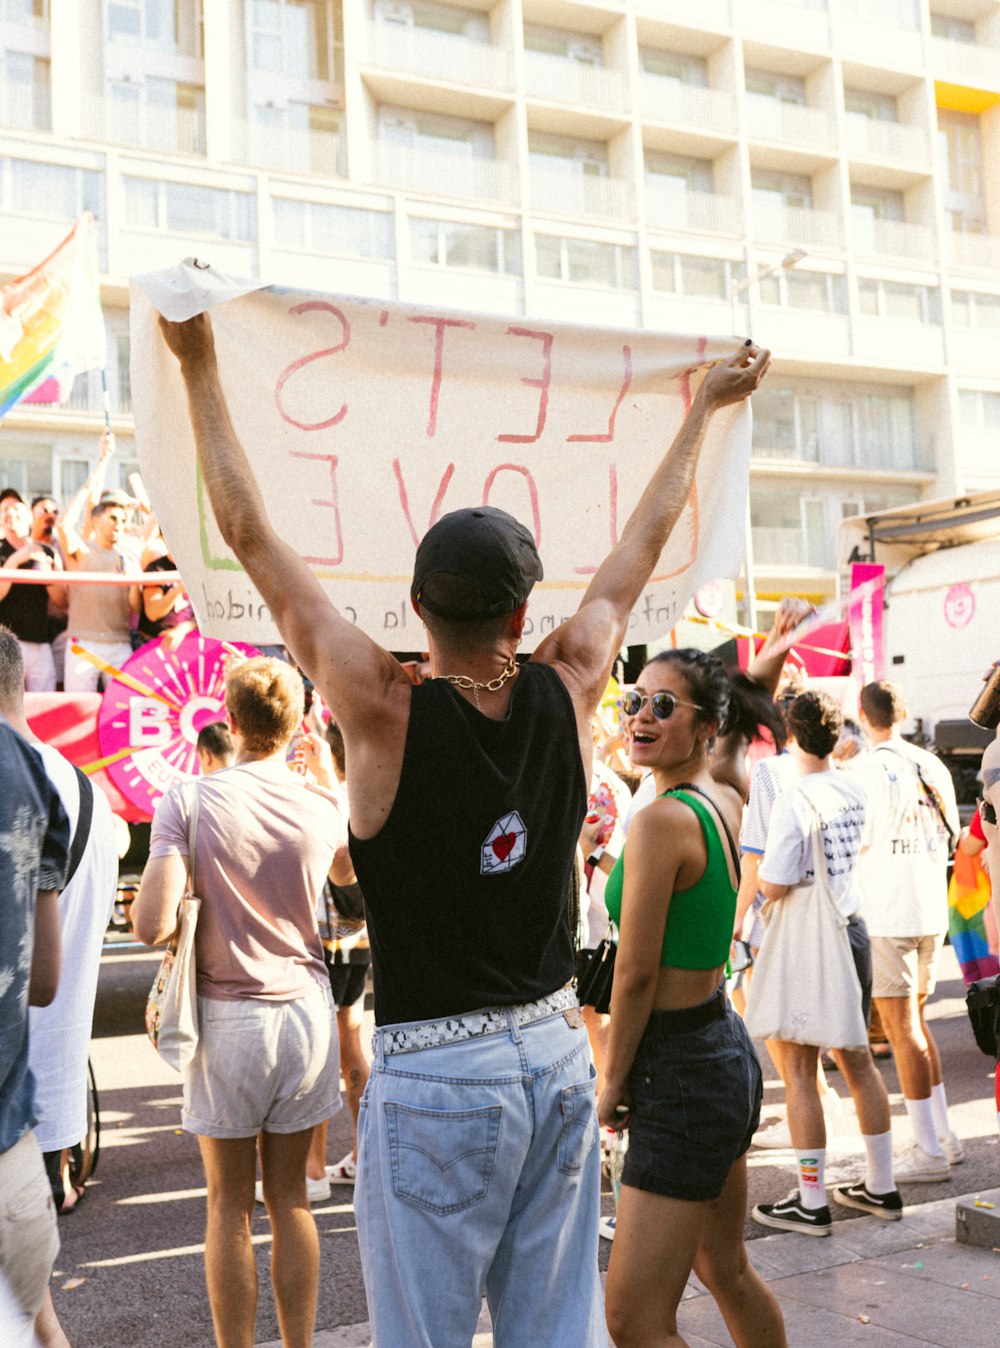 a person holding a sign in a crowd of people